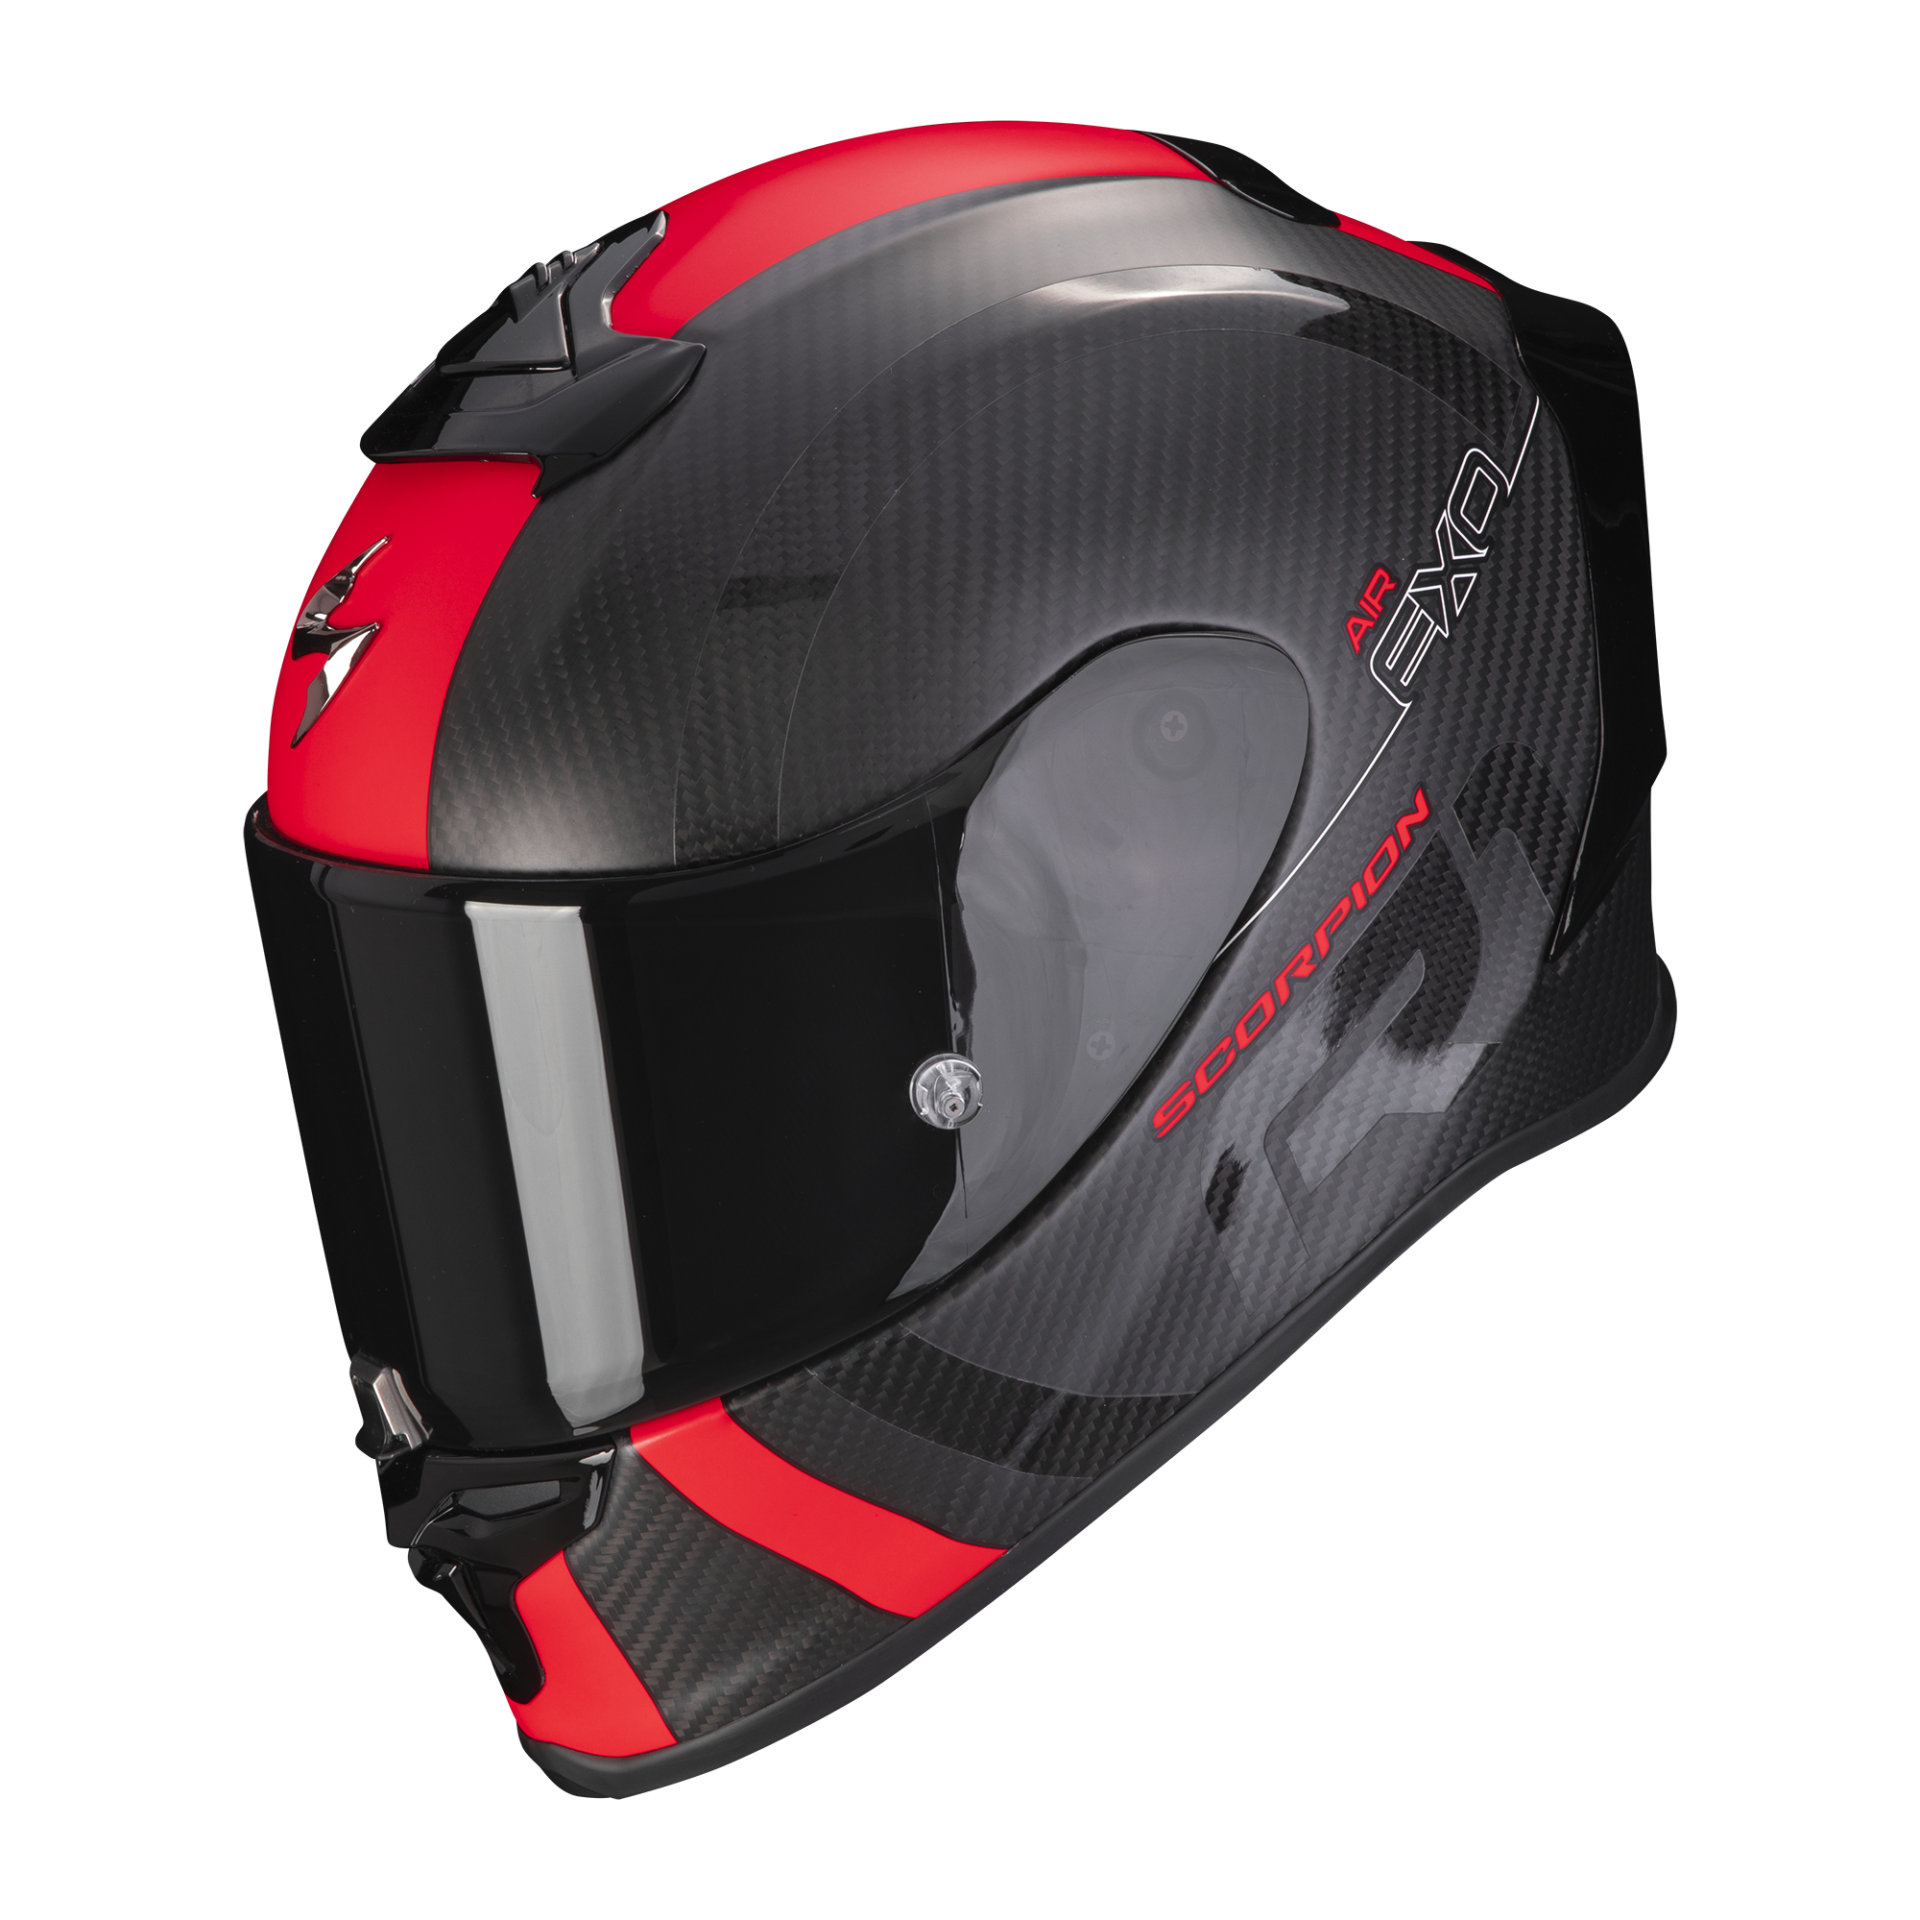 Image of EU Scorpion Exo-R1 Evo Carbon Air Mg Mat Black-Red Casque Intégral Taille XS